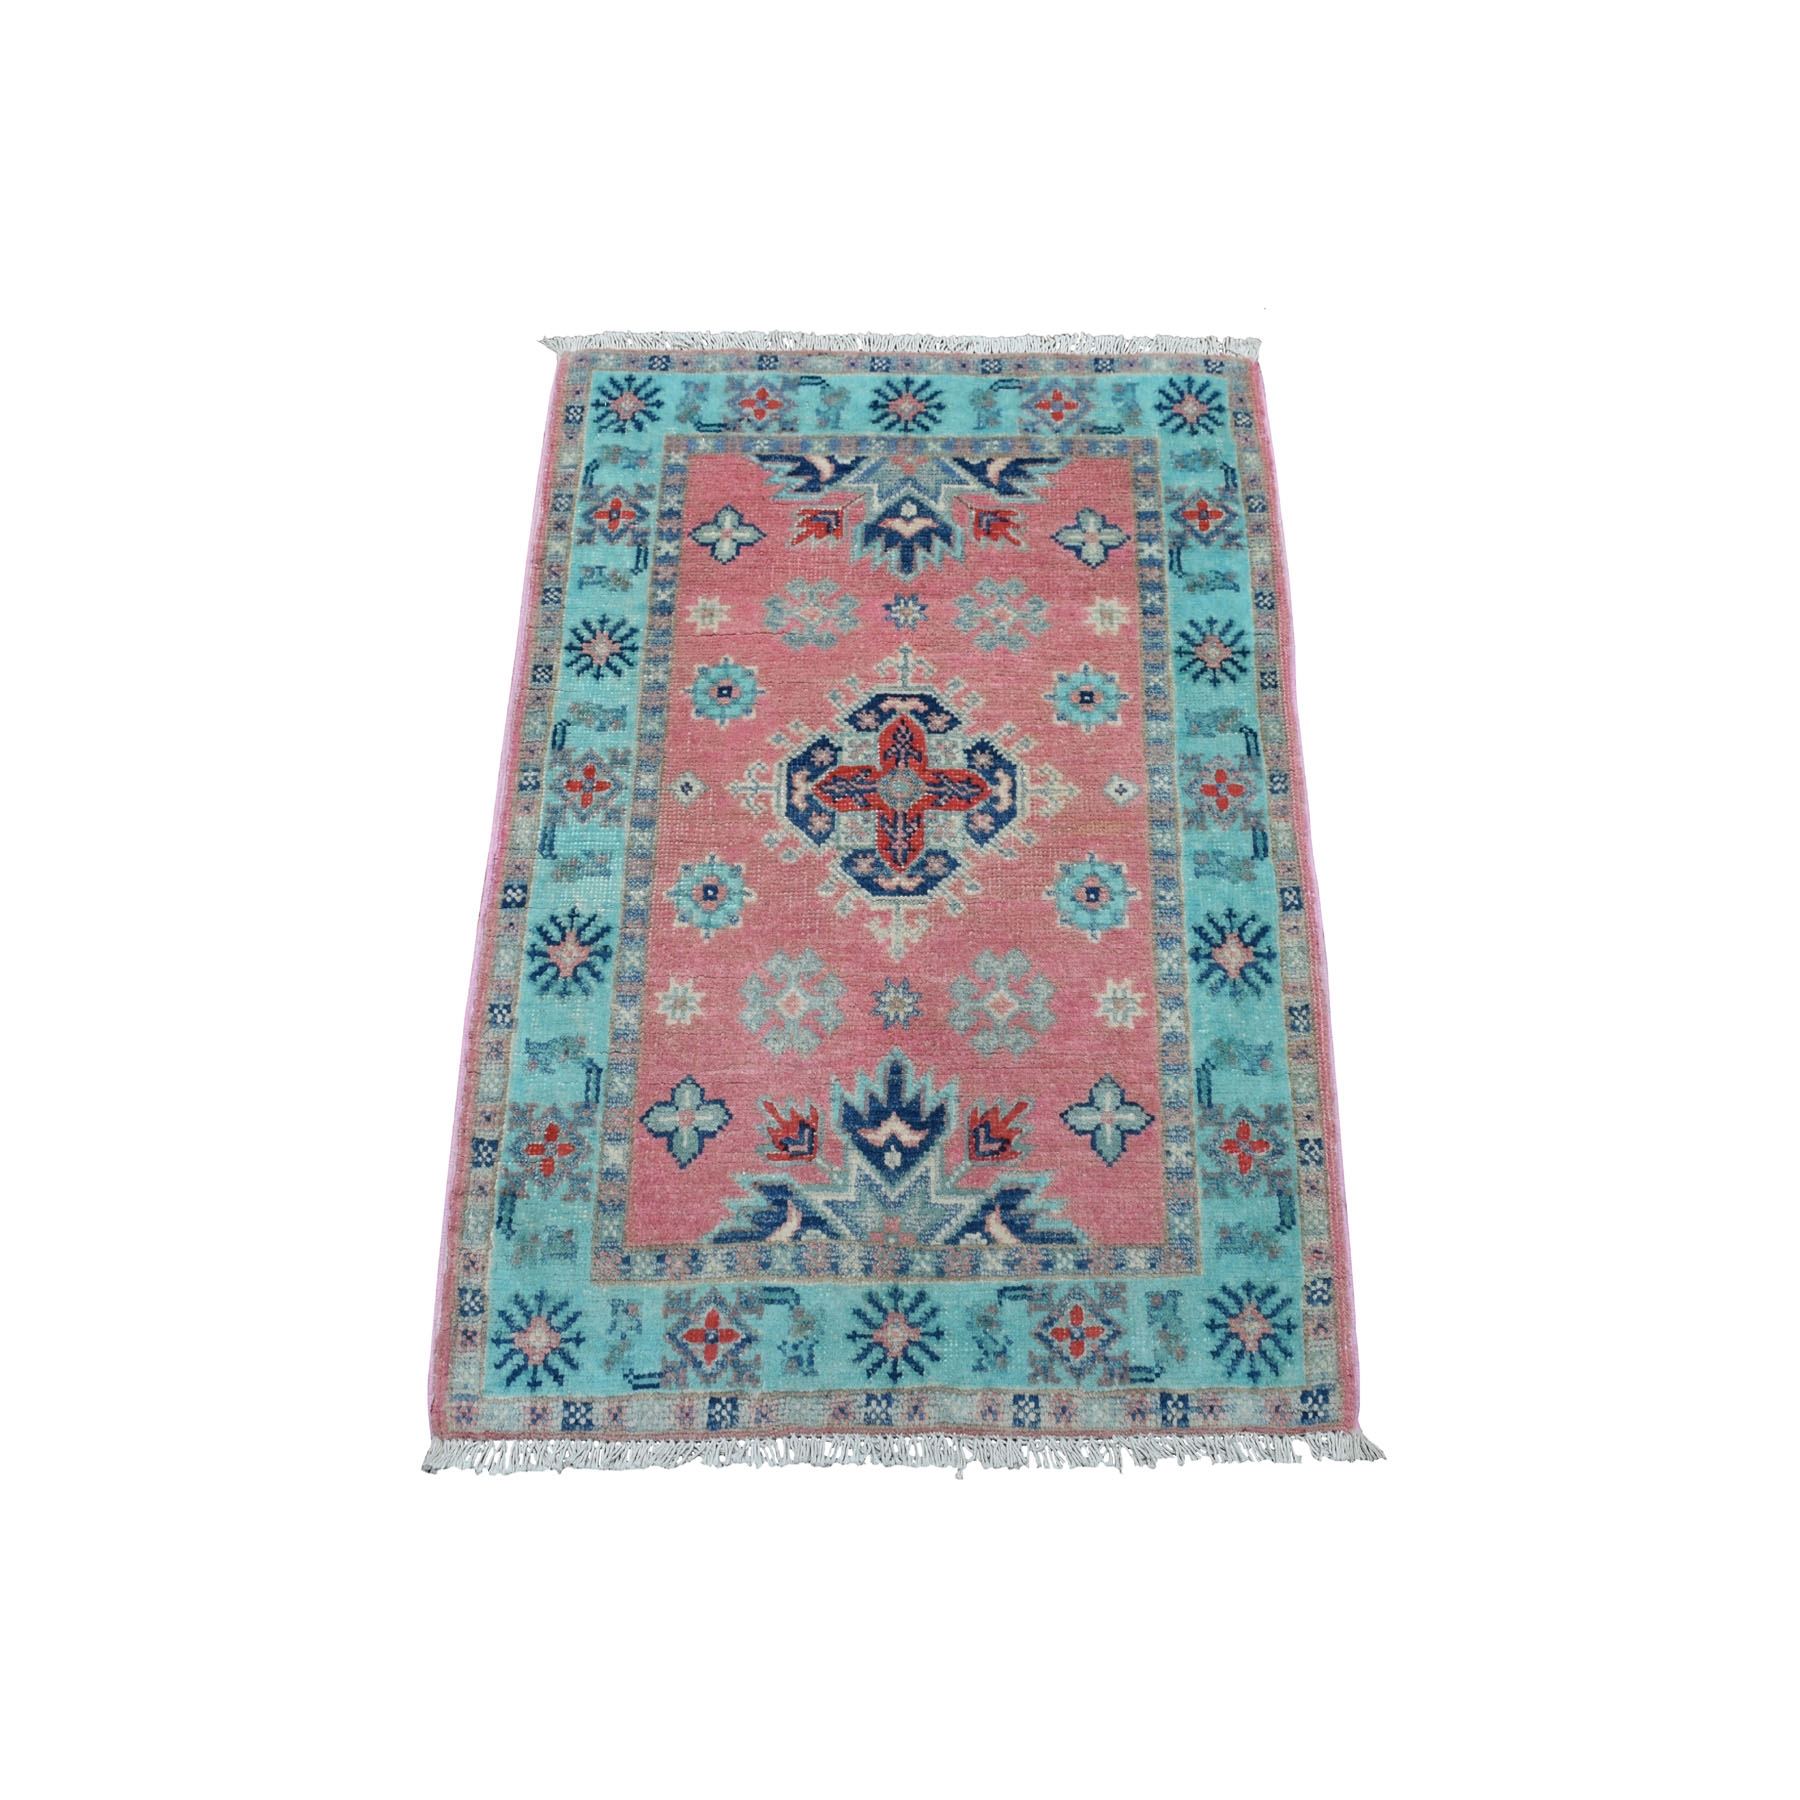 2'1"X3' Colorful Pink Fusion Kazak Pure Wool Geometric Design Hand Knotted Oriental Rug moaedb6d